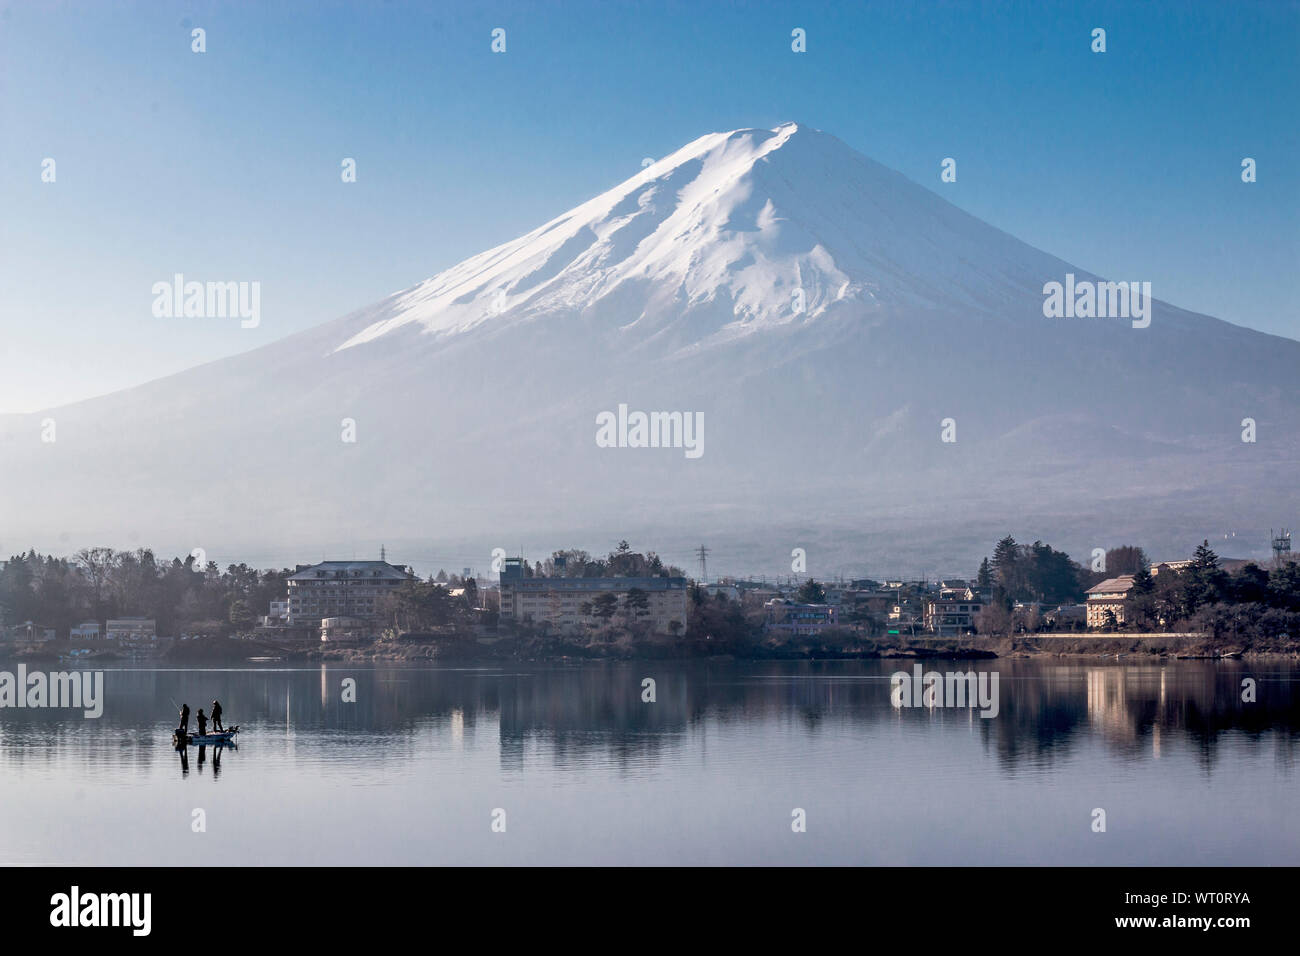 View of Mount Fujisan from Lake Kawaguchi in the morning with 3 men fishing in the lake Stock Photo